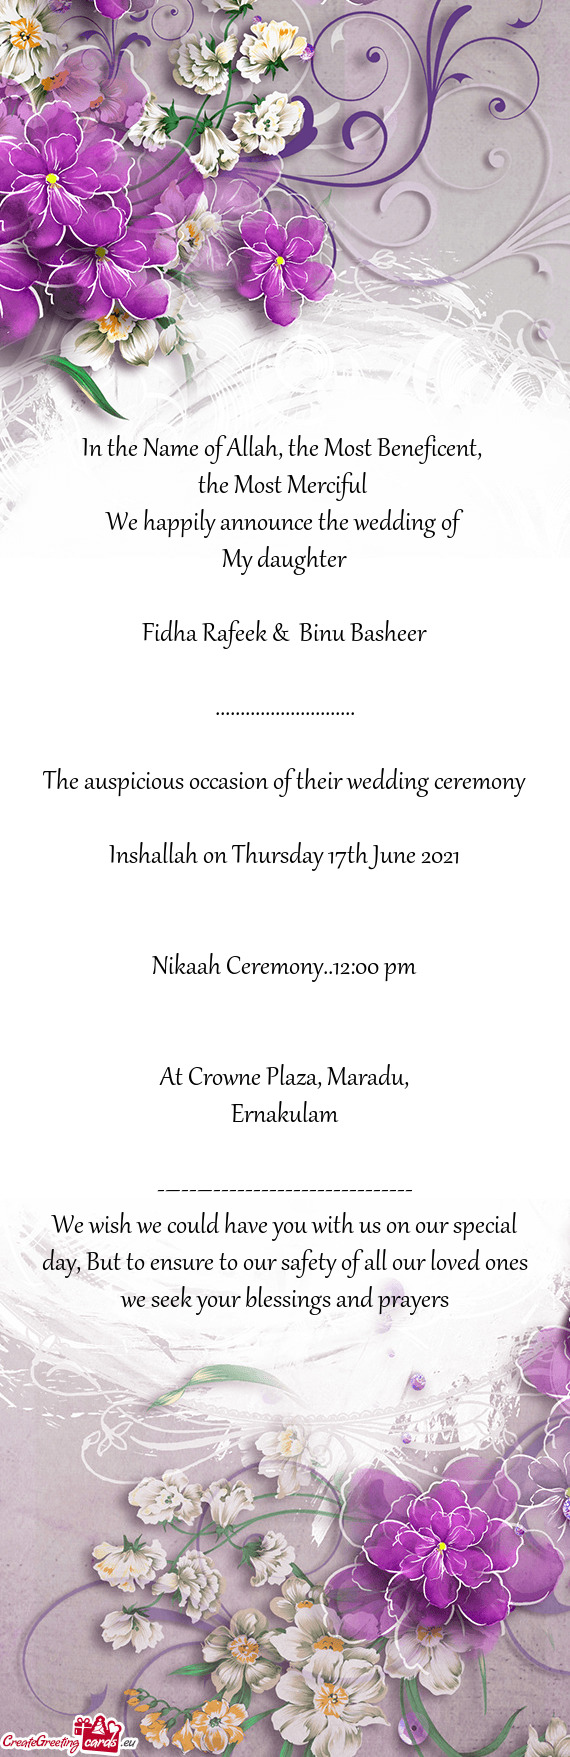 The Most Merciful 
 We happily announce the wedding of
 My daughter
 
 Fidha Rafeek & Binu Bashe